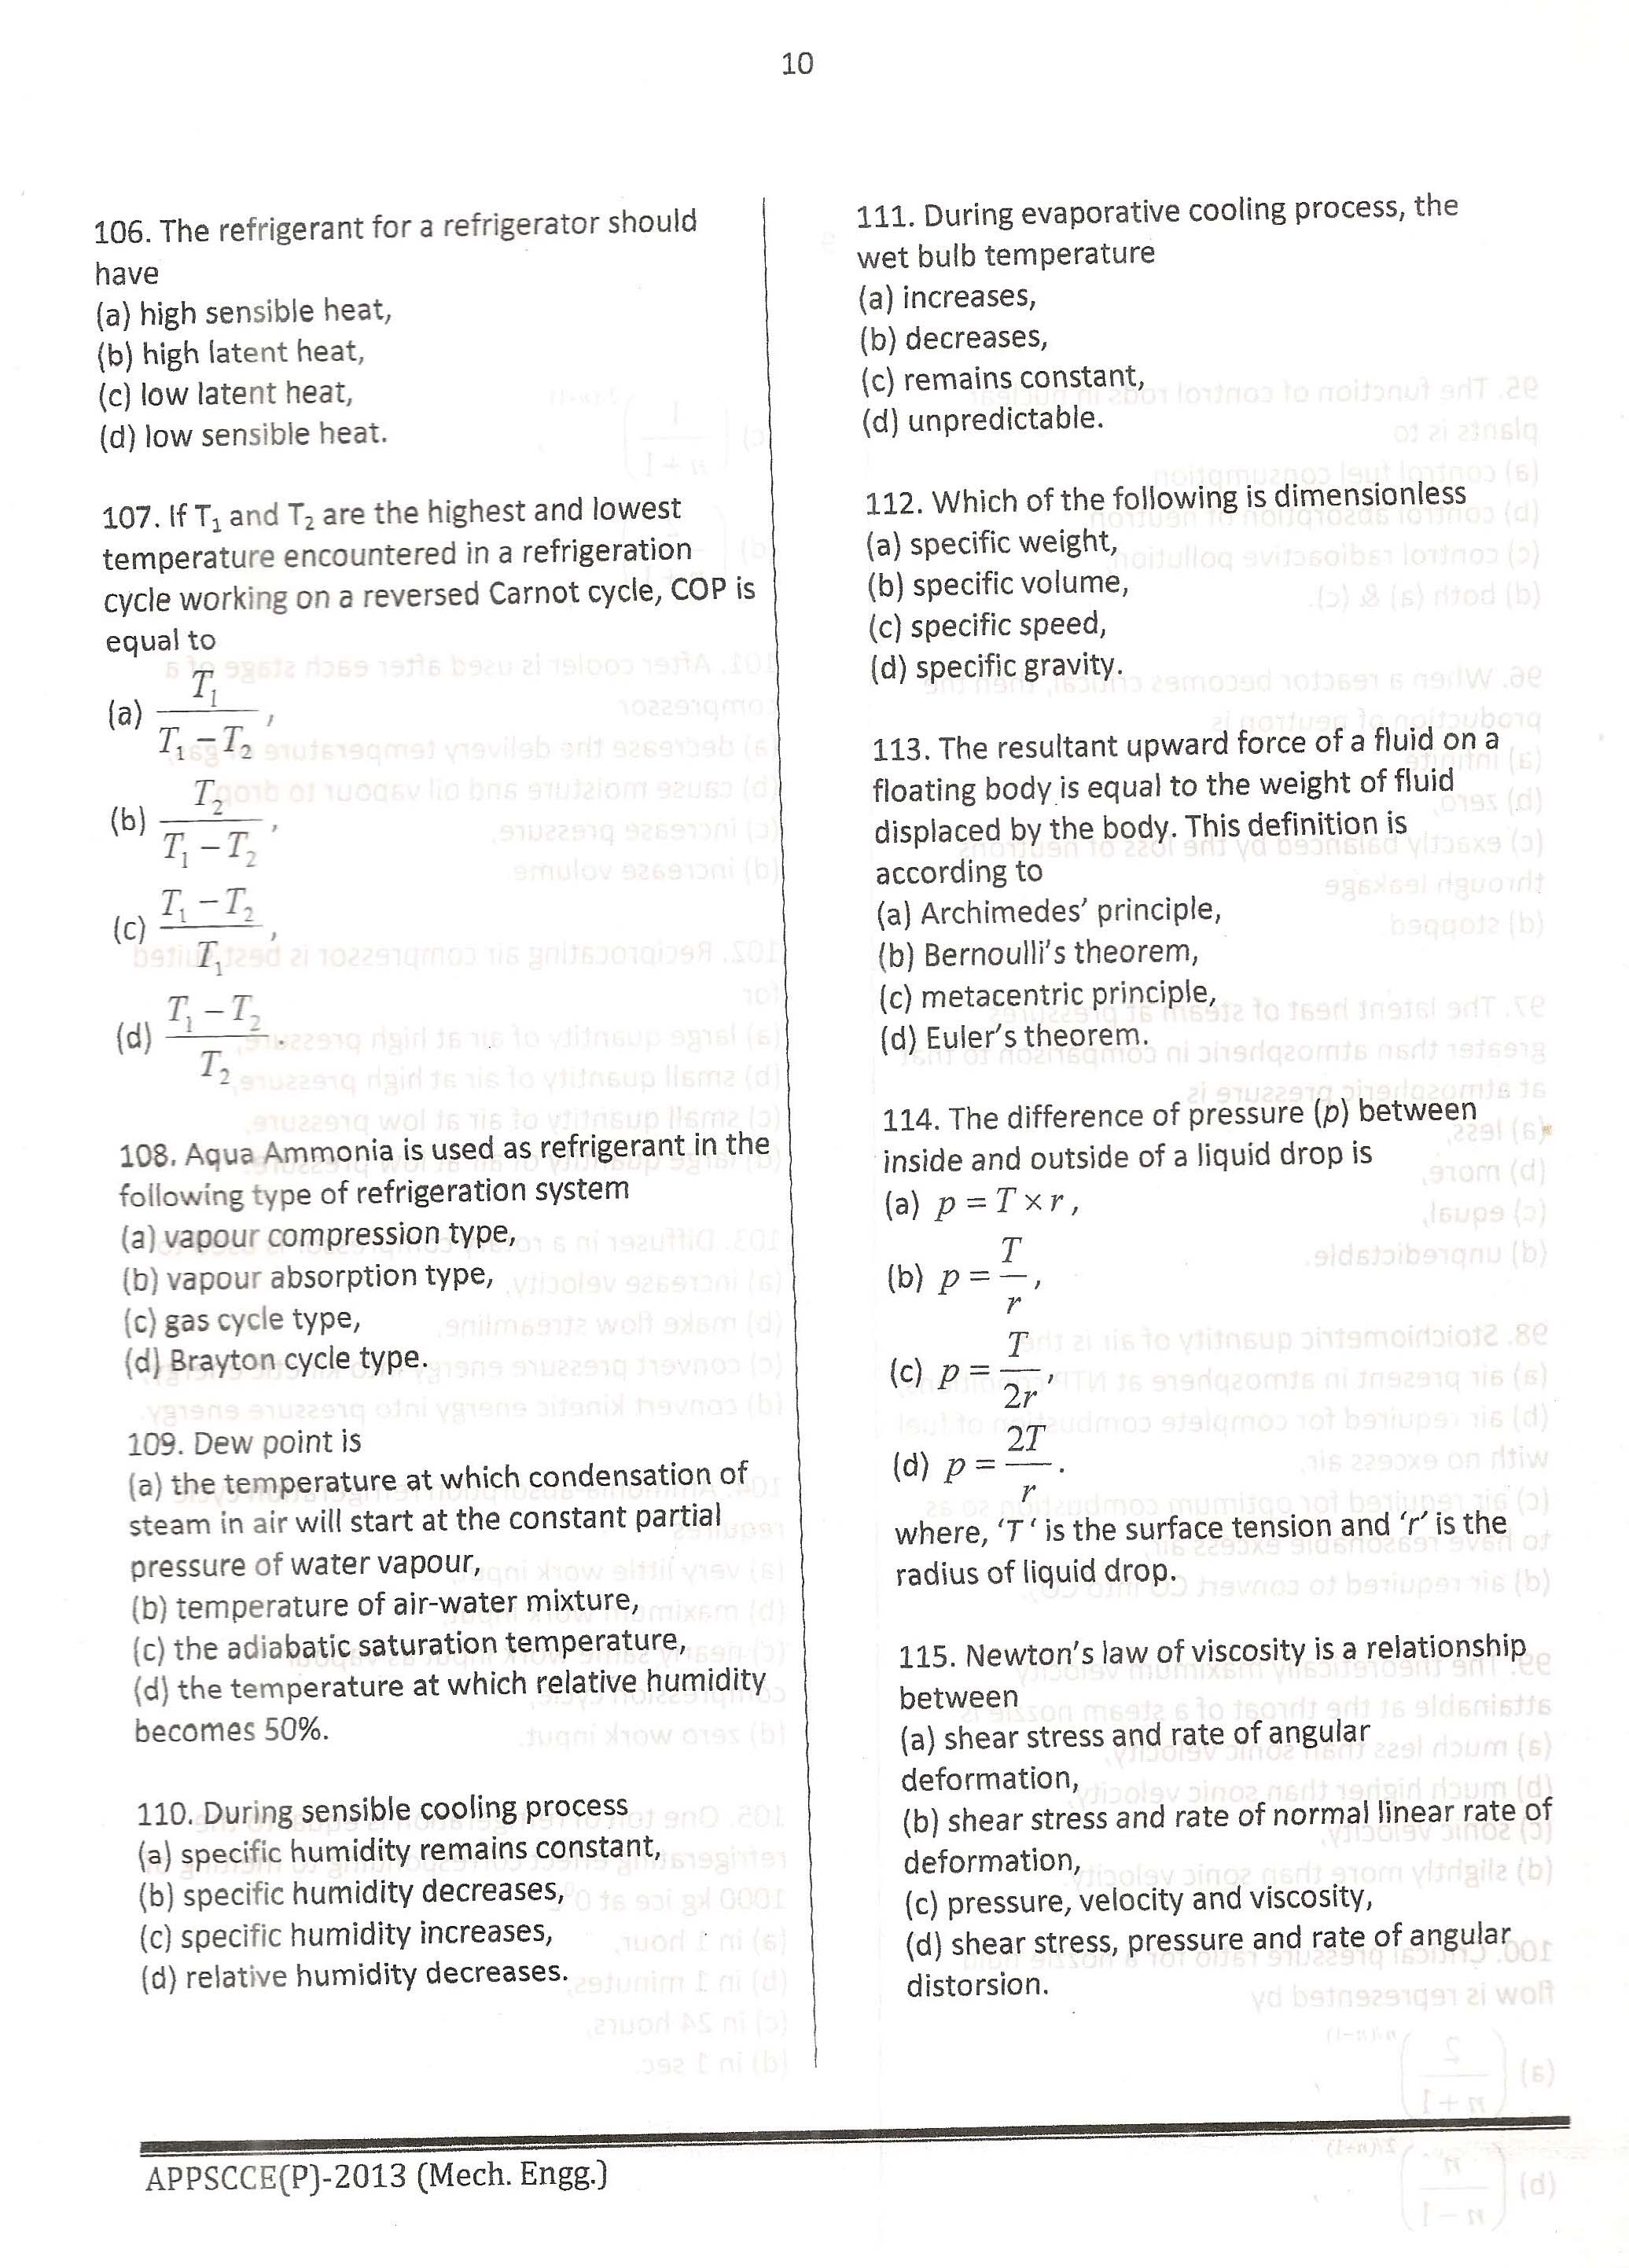 APPSC Combined Competitive Prelims Exam 2013 Mechanical Engineering 11